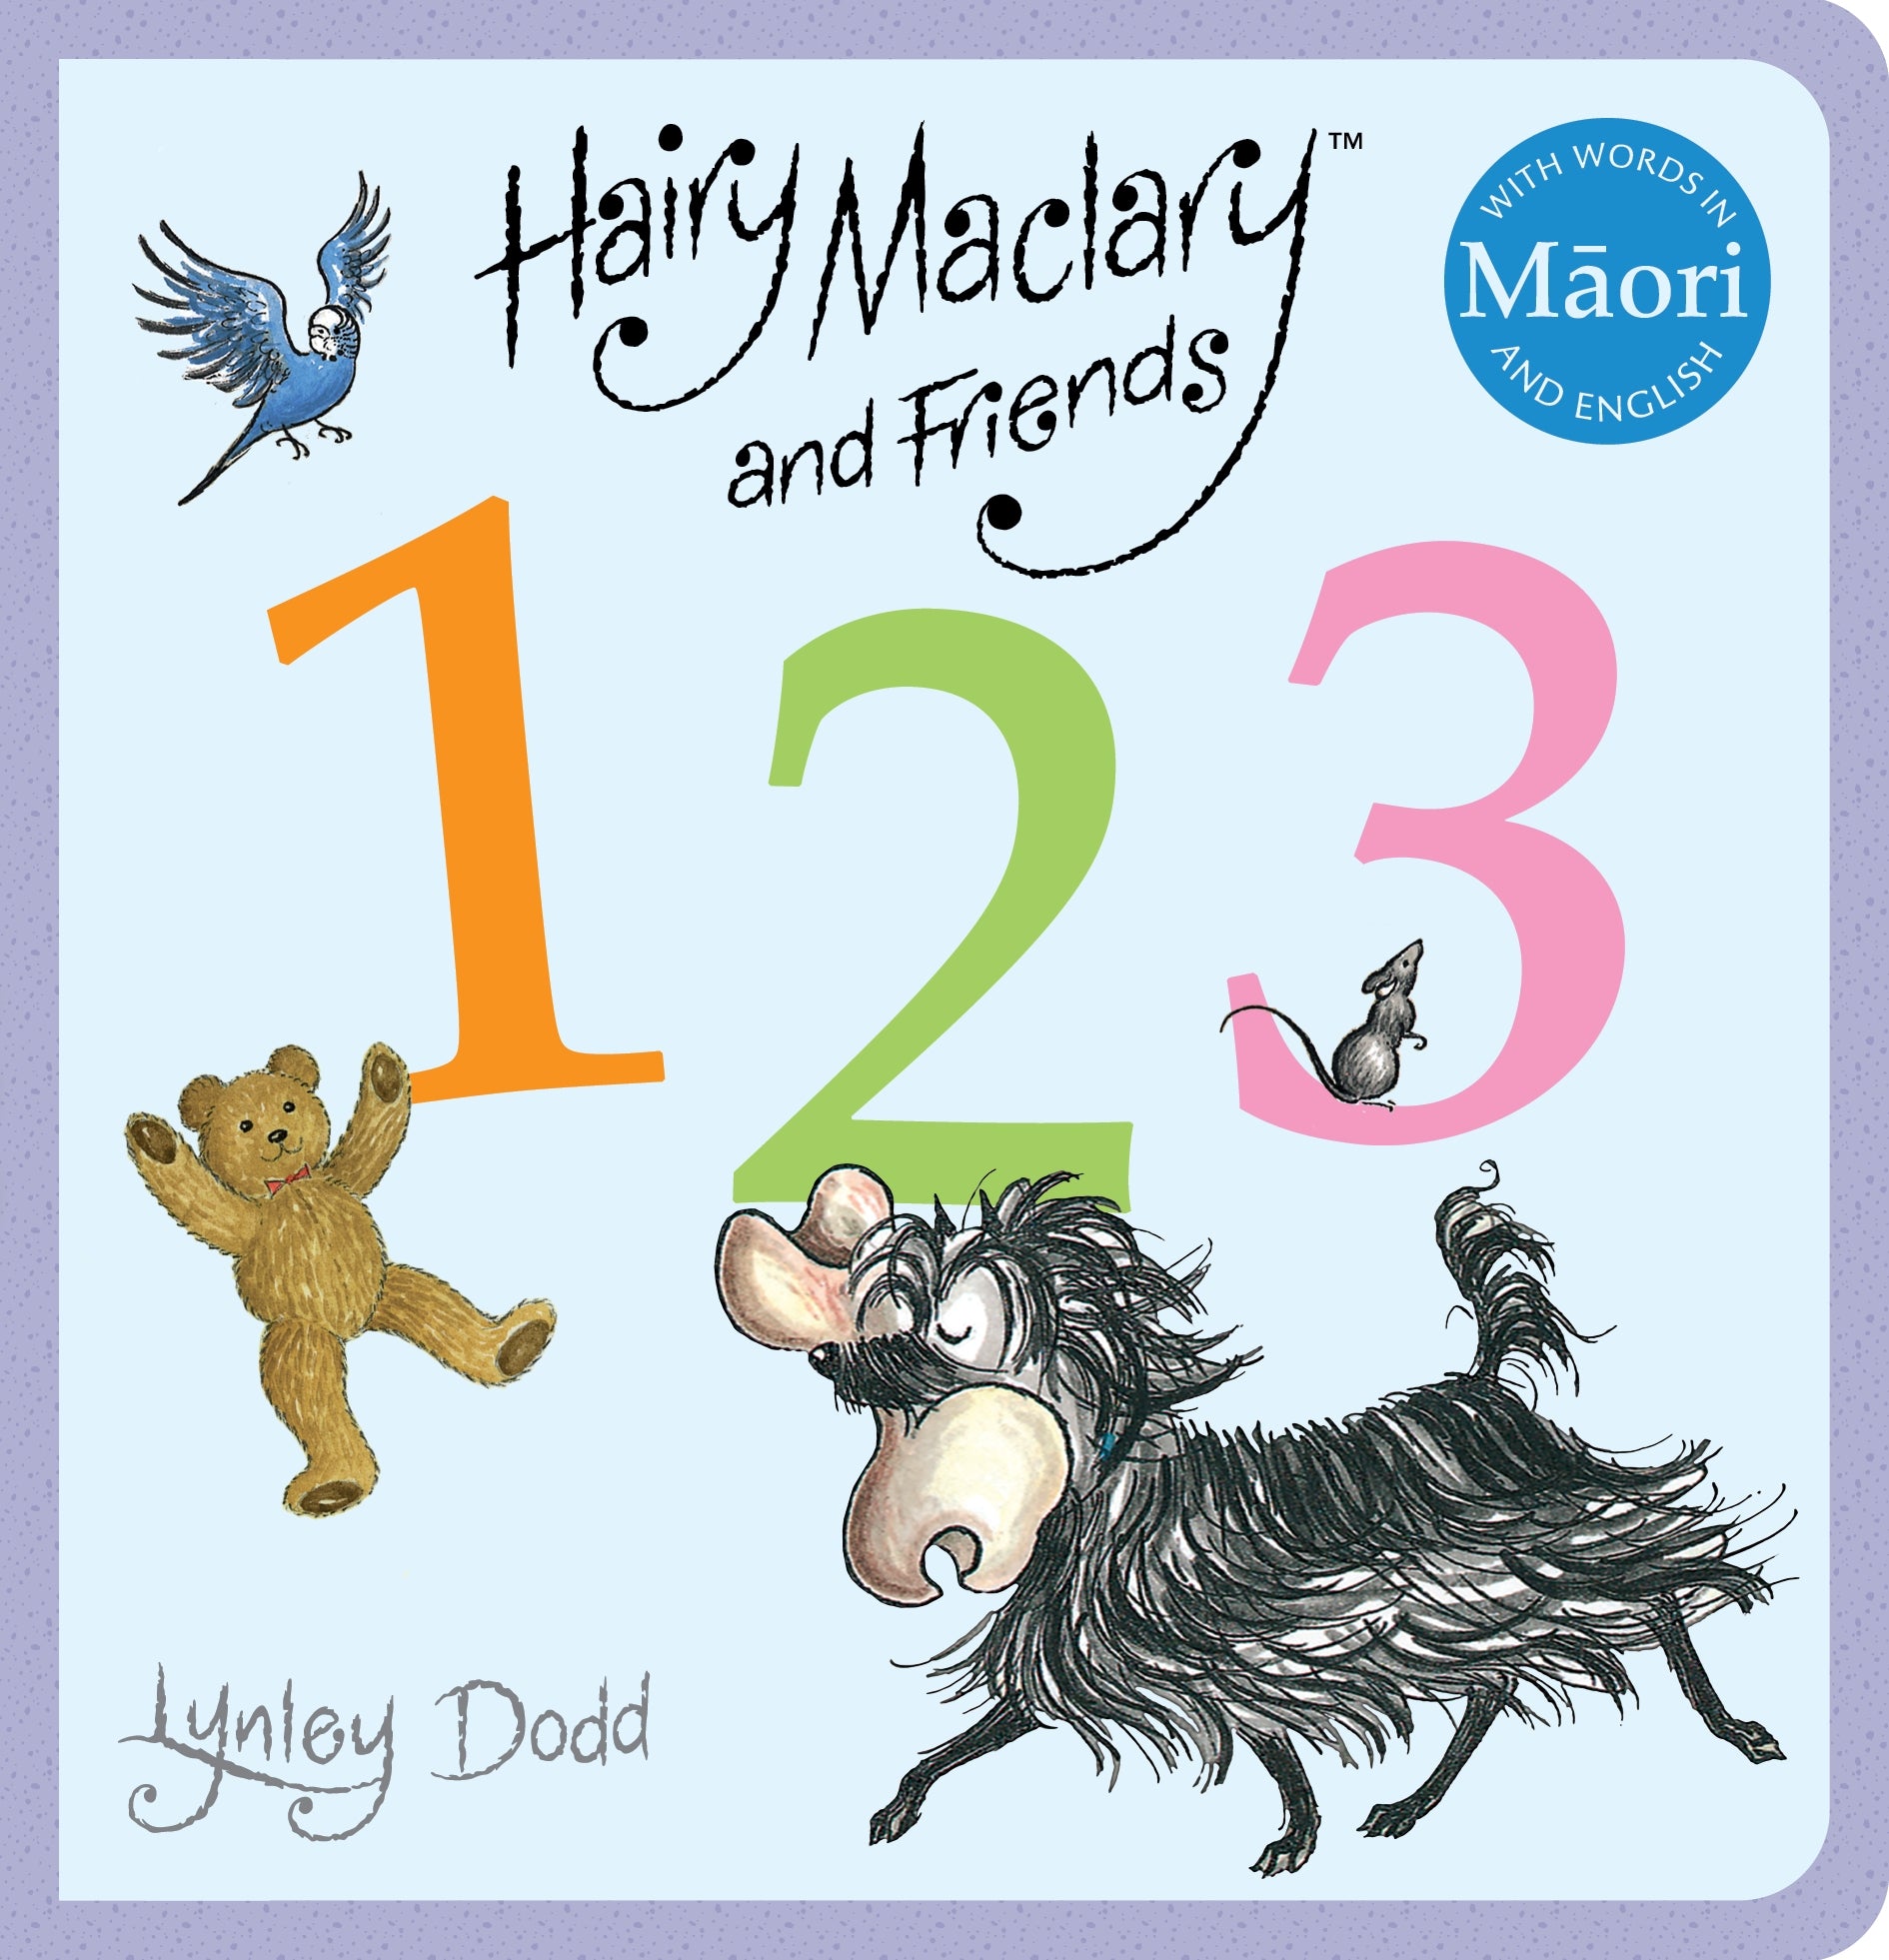 Hairy Maclary and Friends: 123 in Maori and English